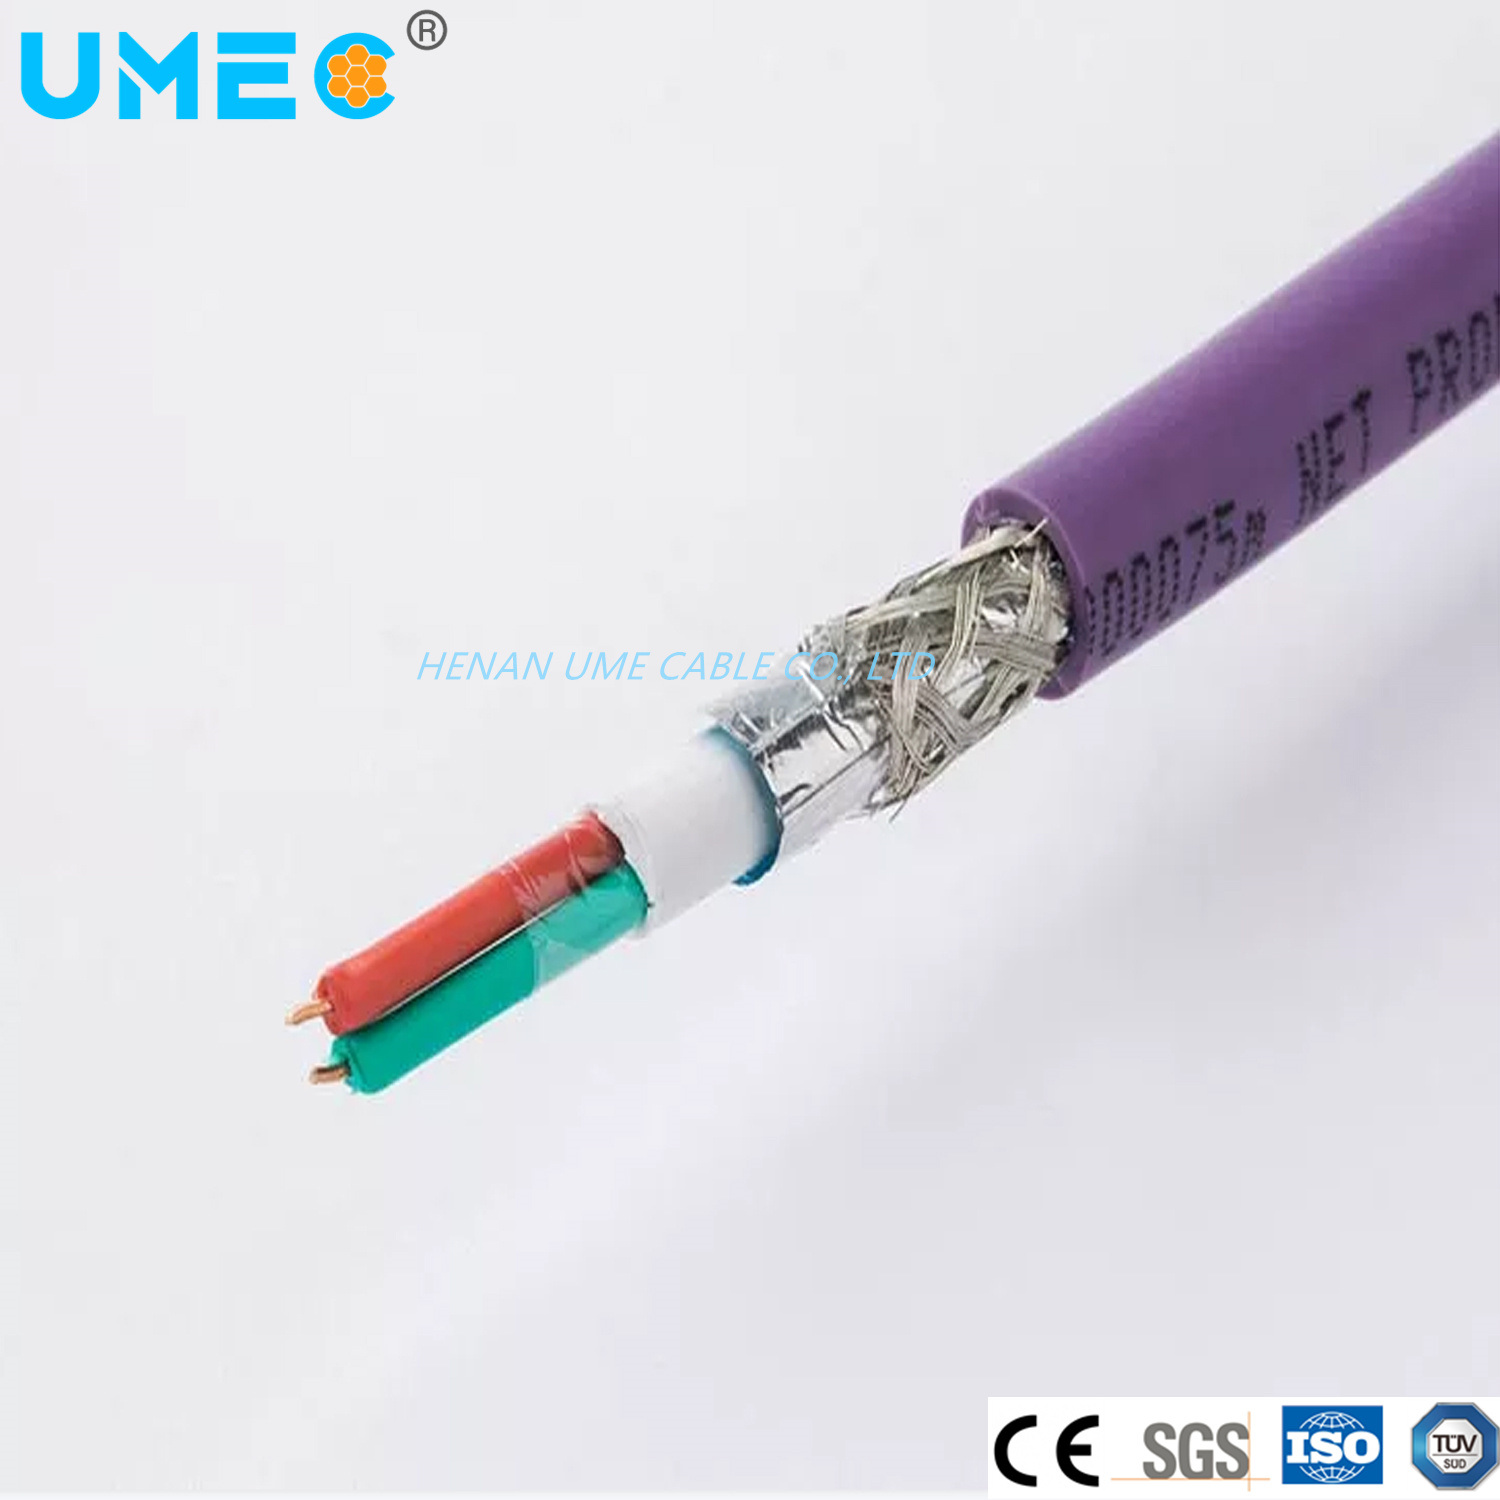 Quick Delivery Industrial Direct Ethernetcable 6xv1830-0eh10 6xv18300eh10 8mmcable Wire